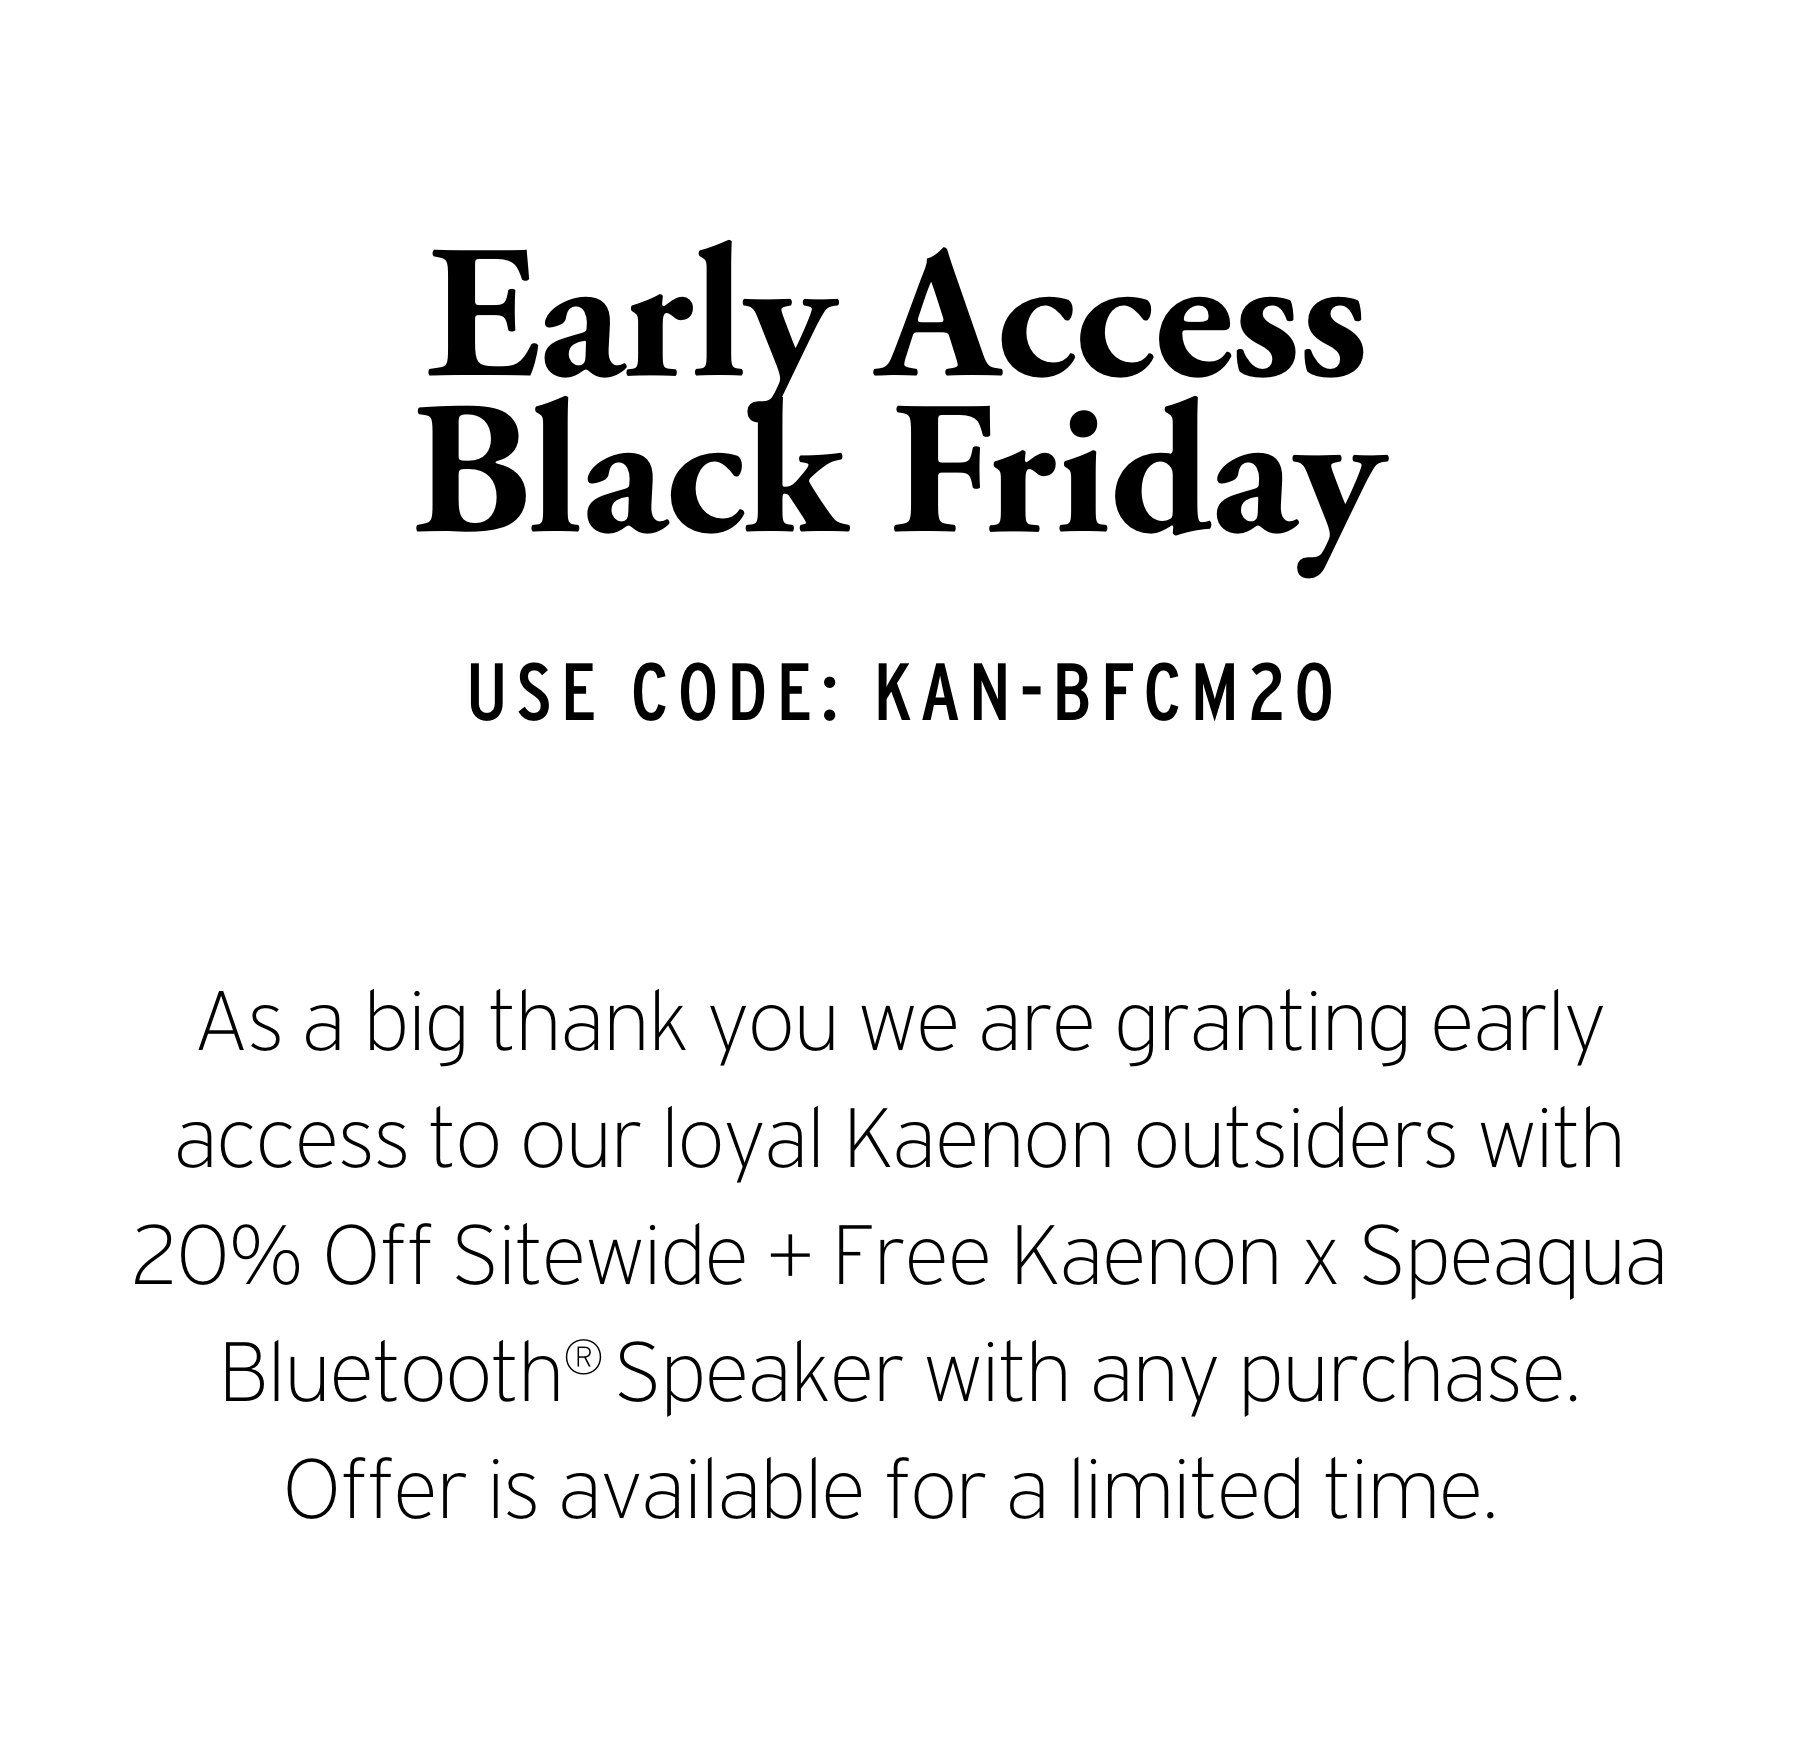 Text. Early Access Black Friday. Code: KAN-BFCM20.